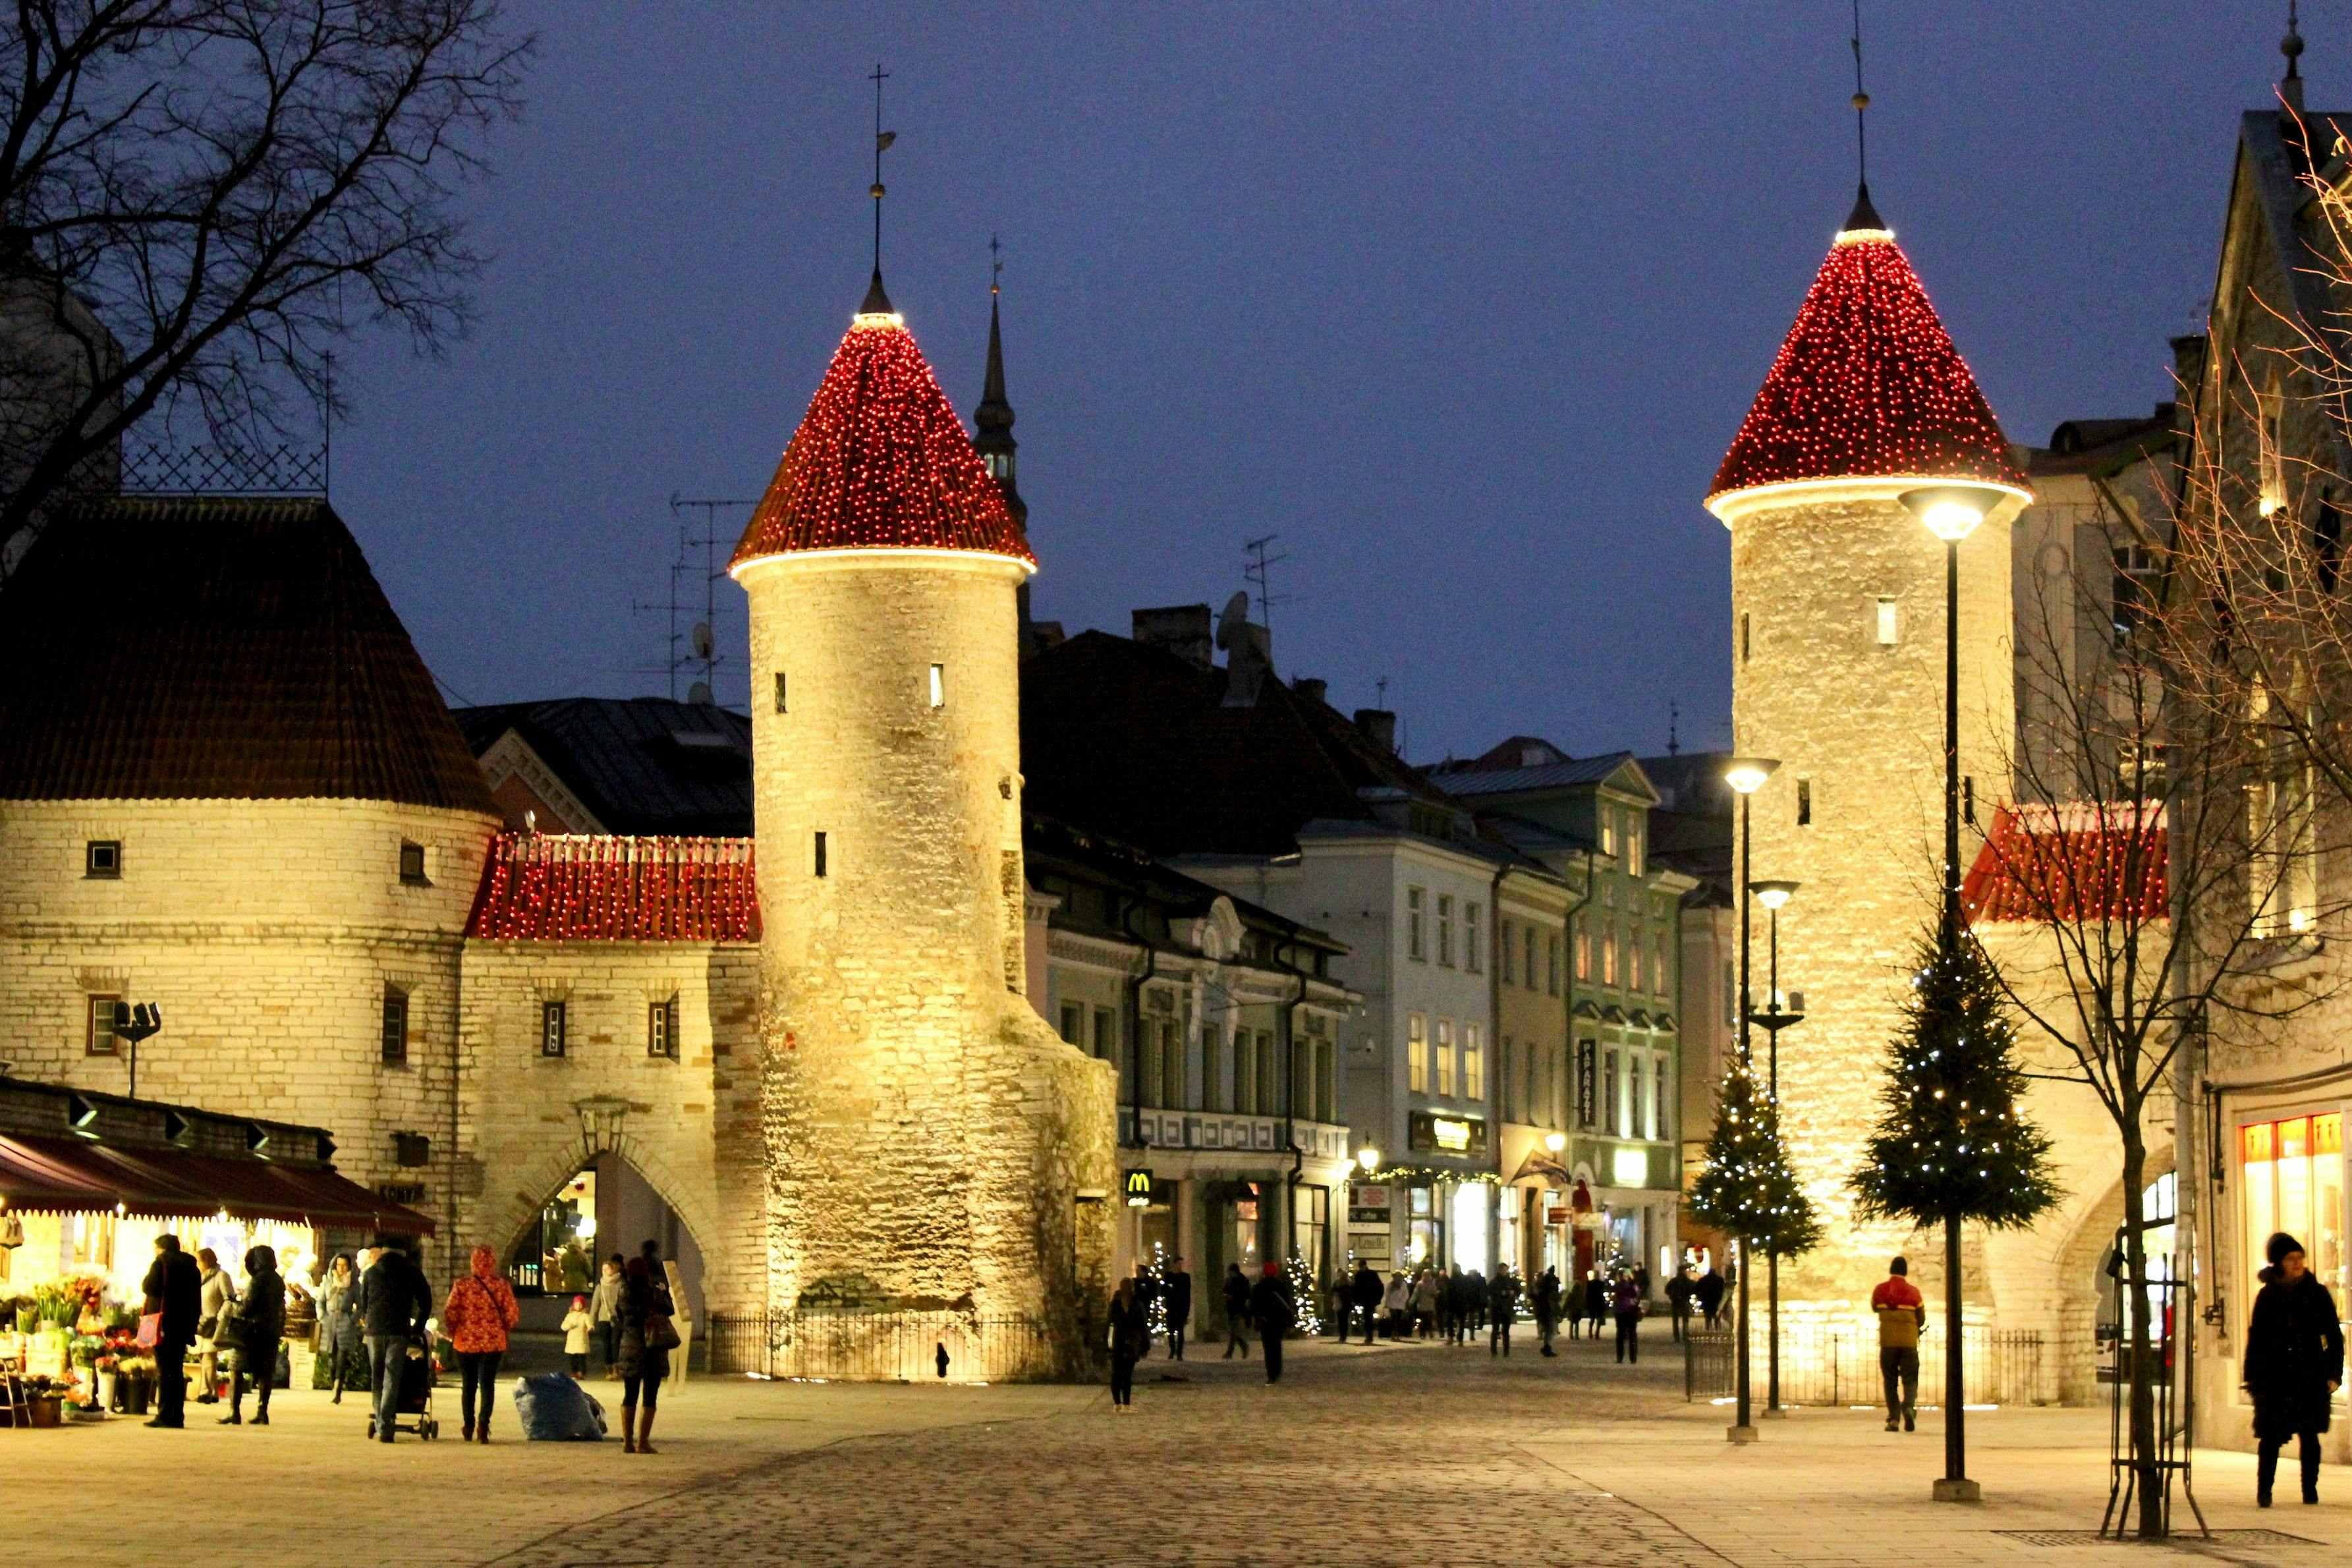 View of the Old Town of Tallinn in Estonia.